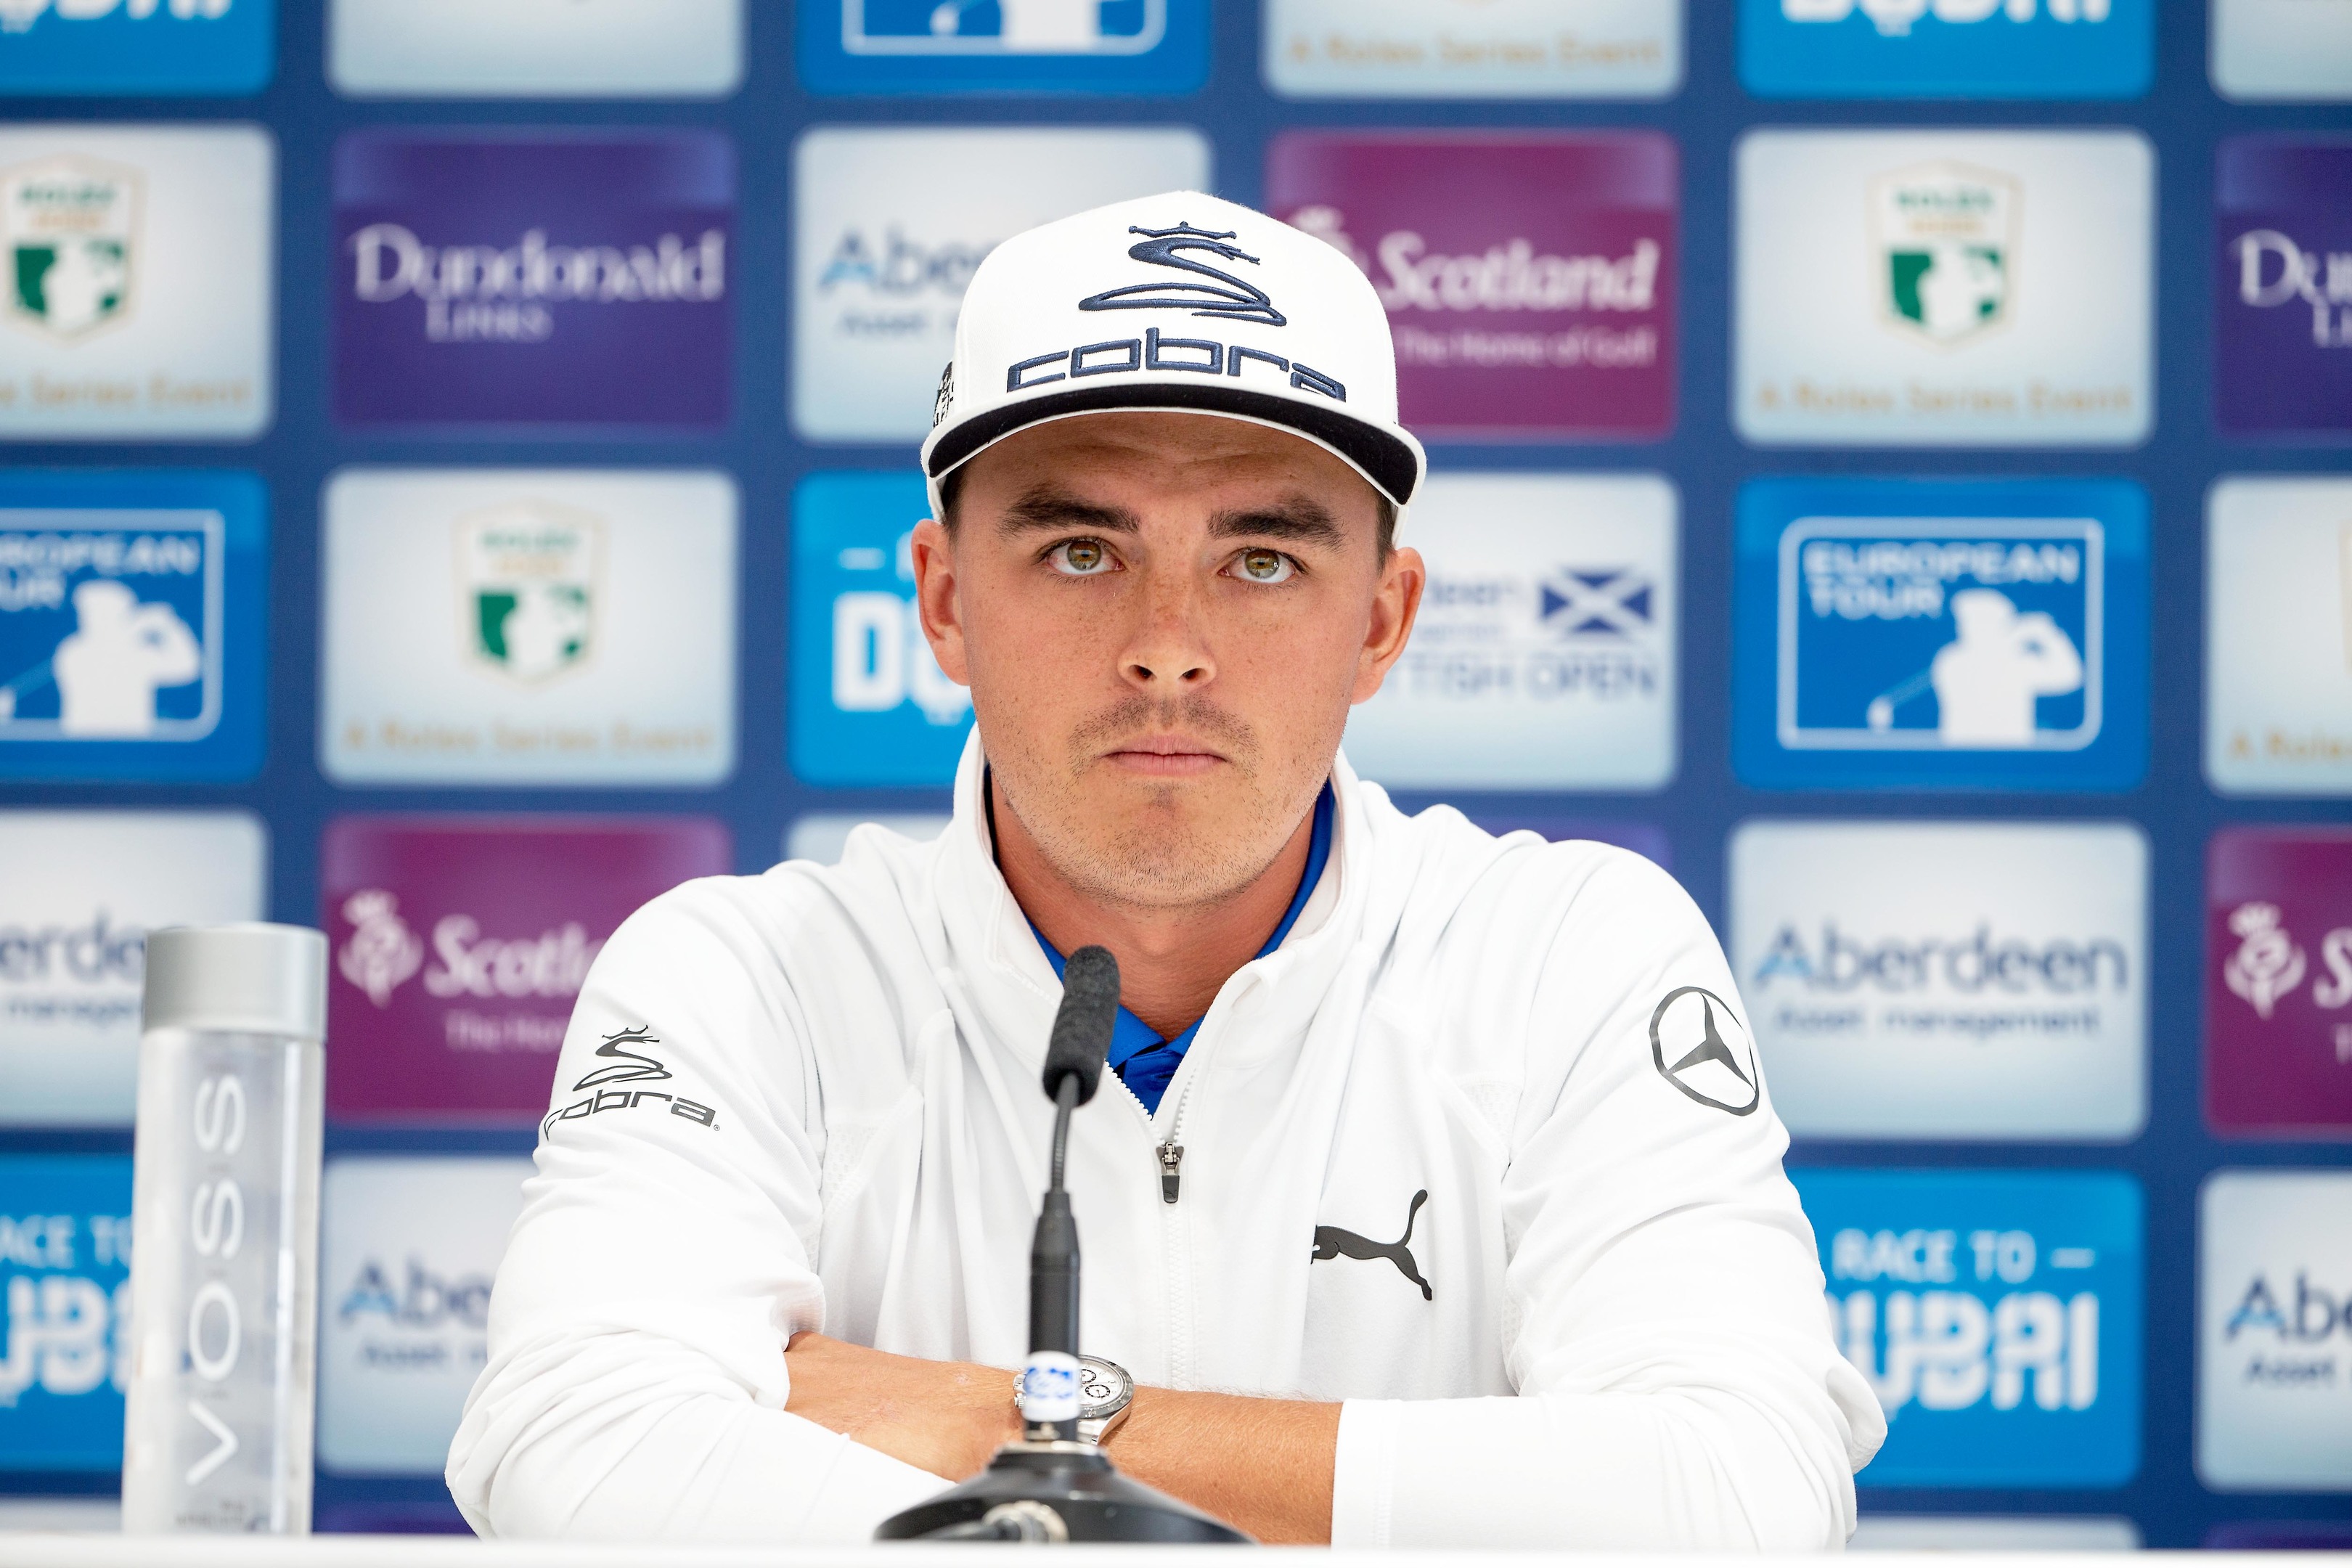 Rickie Fowler is in pensive mood ahead of the Scottish Open.